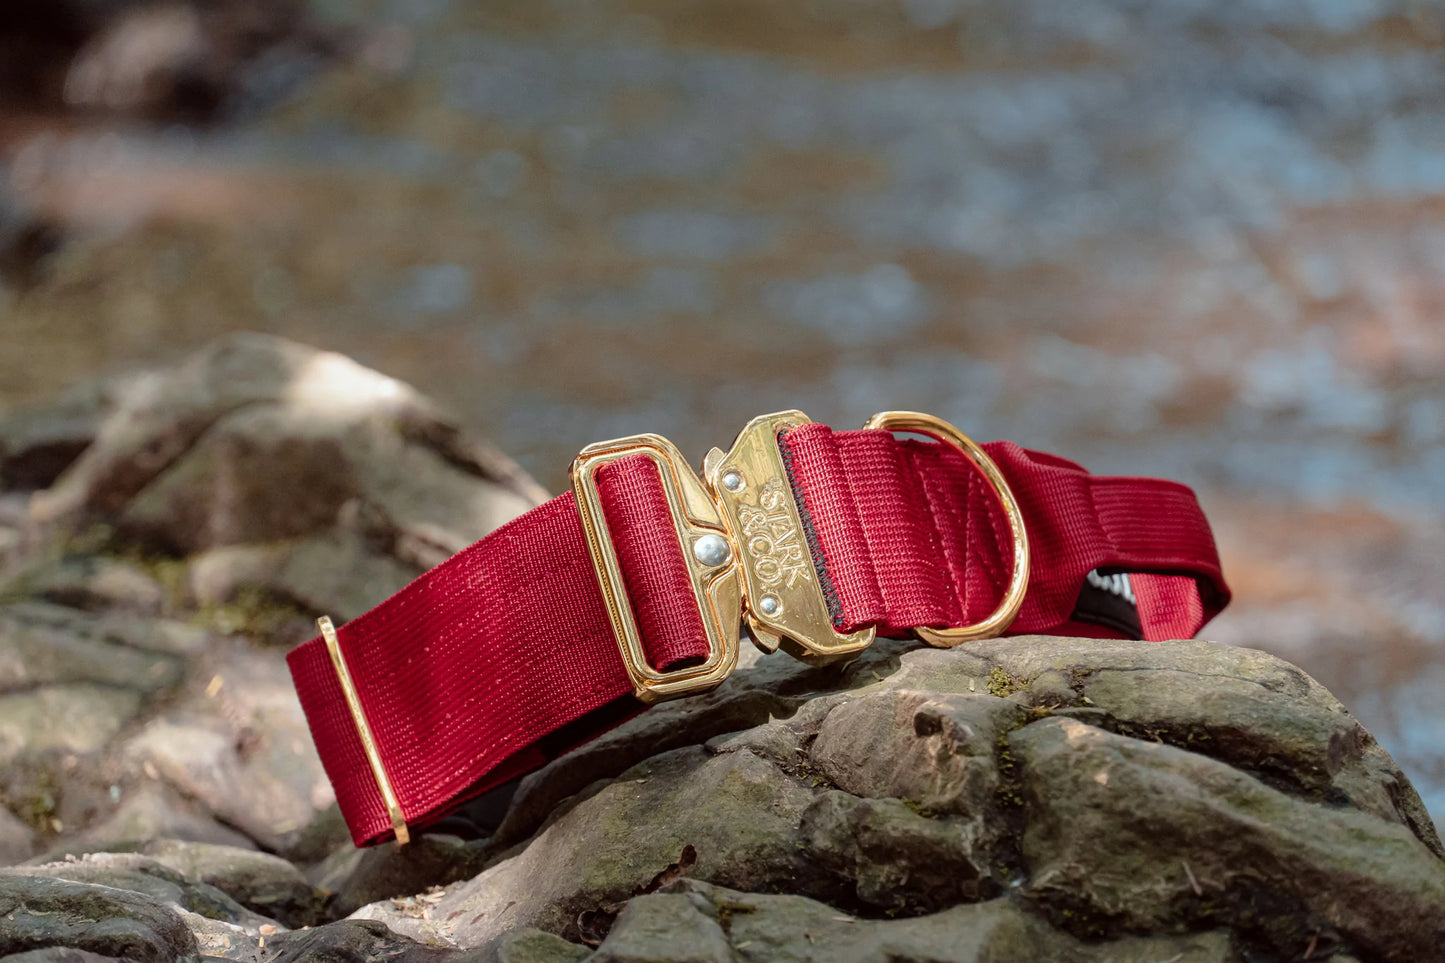 5cm Warrior City Red with AirTag pocket